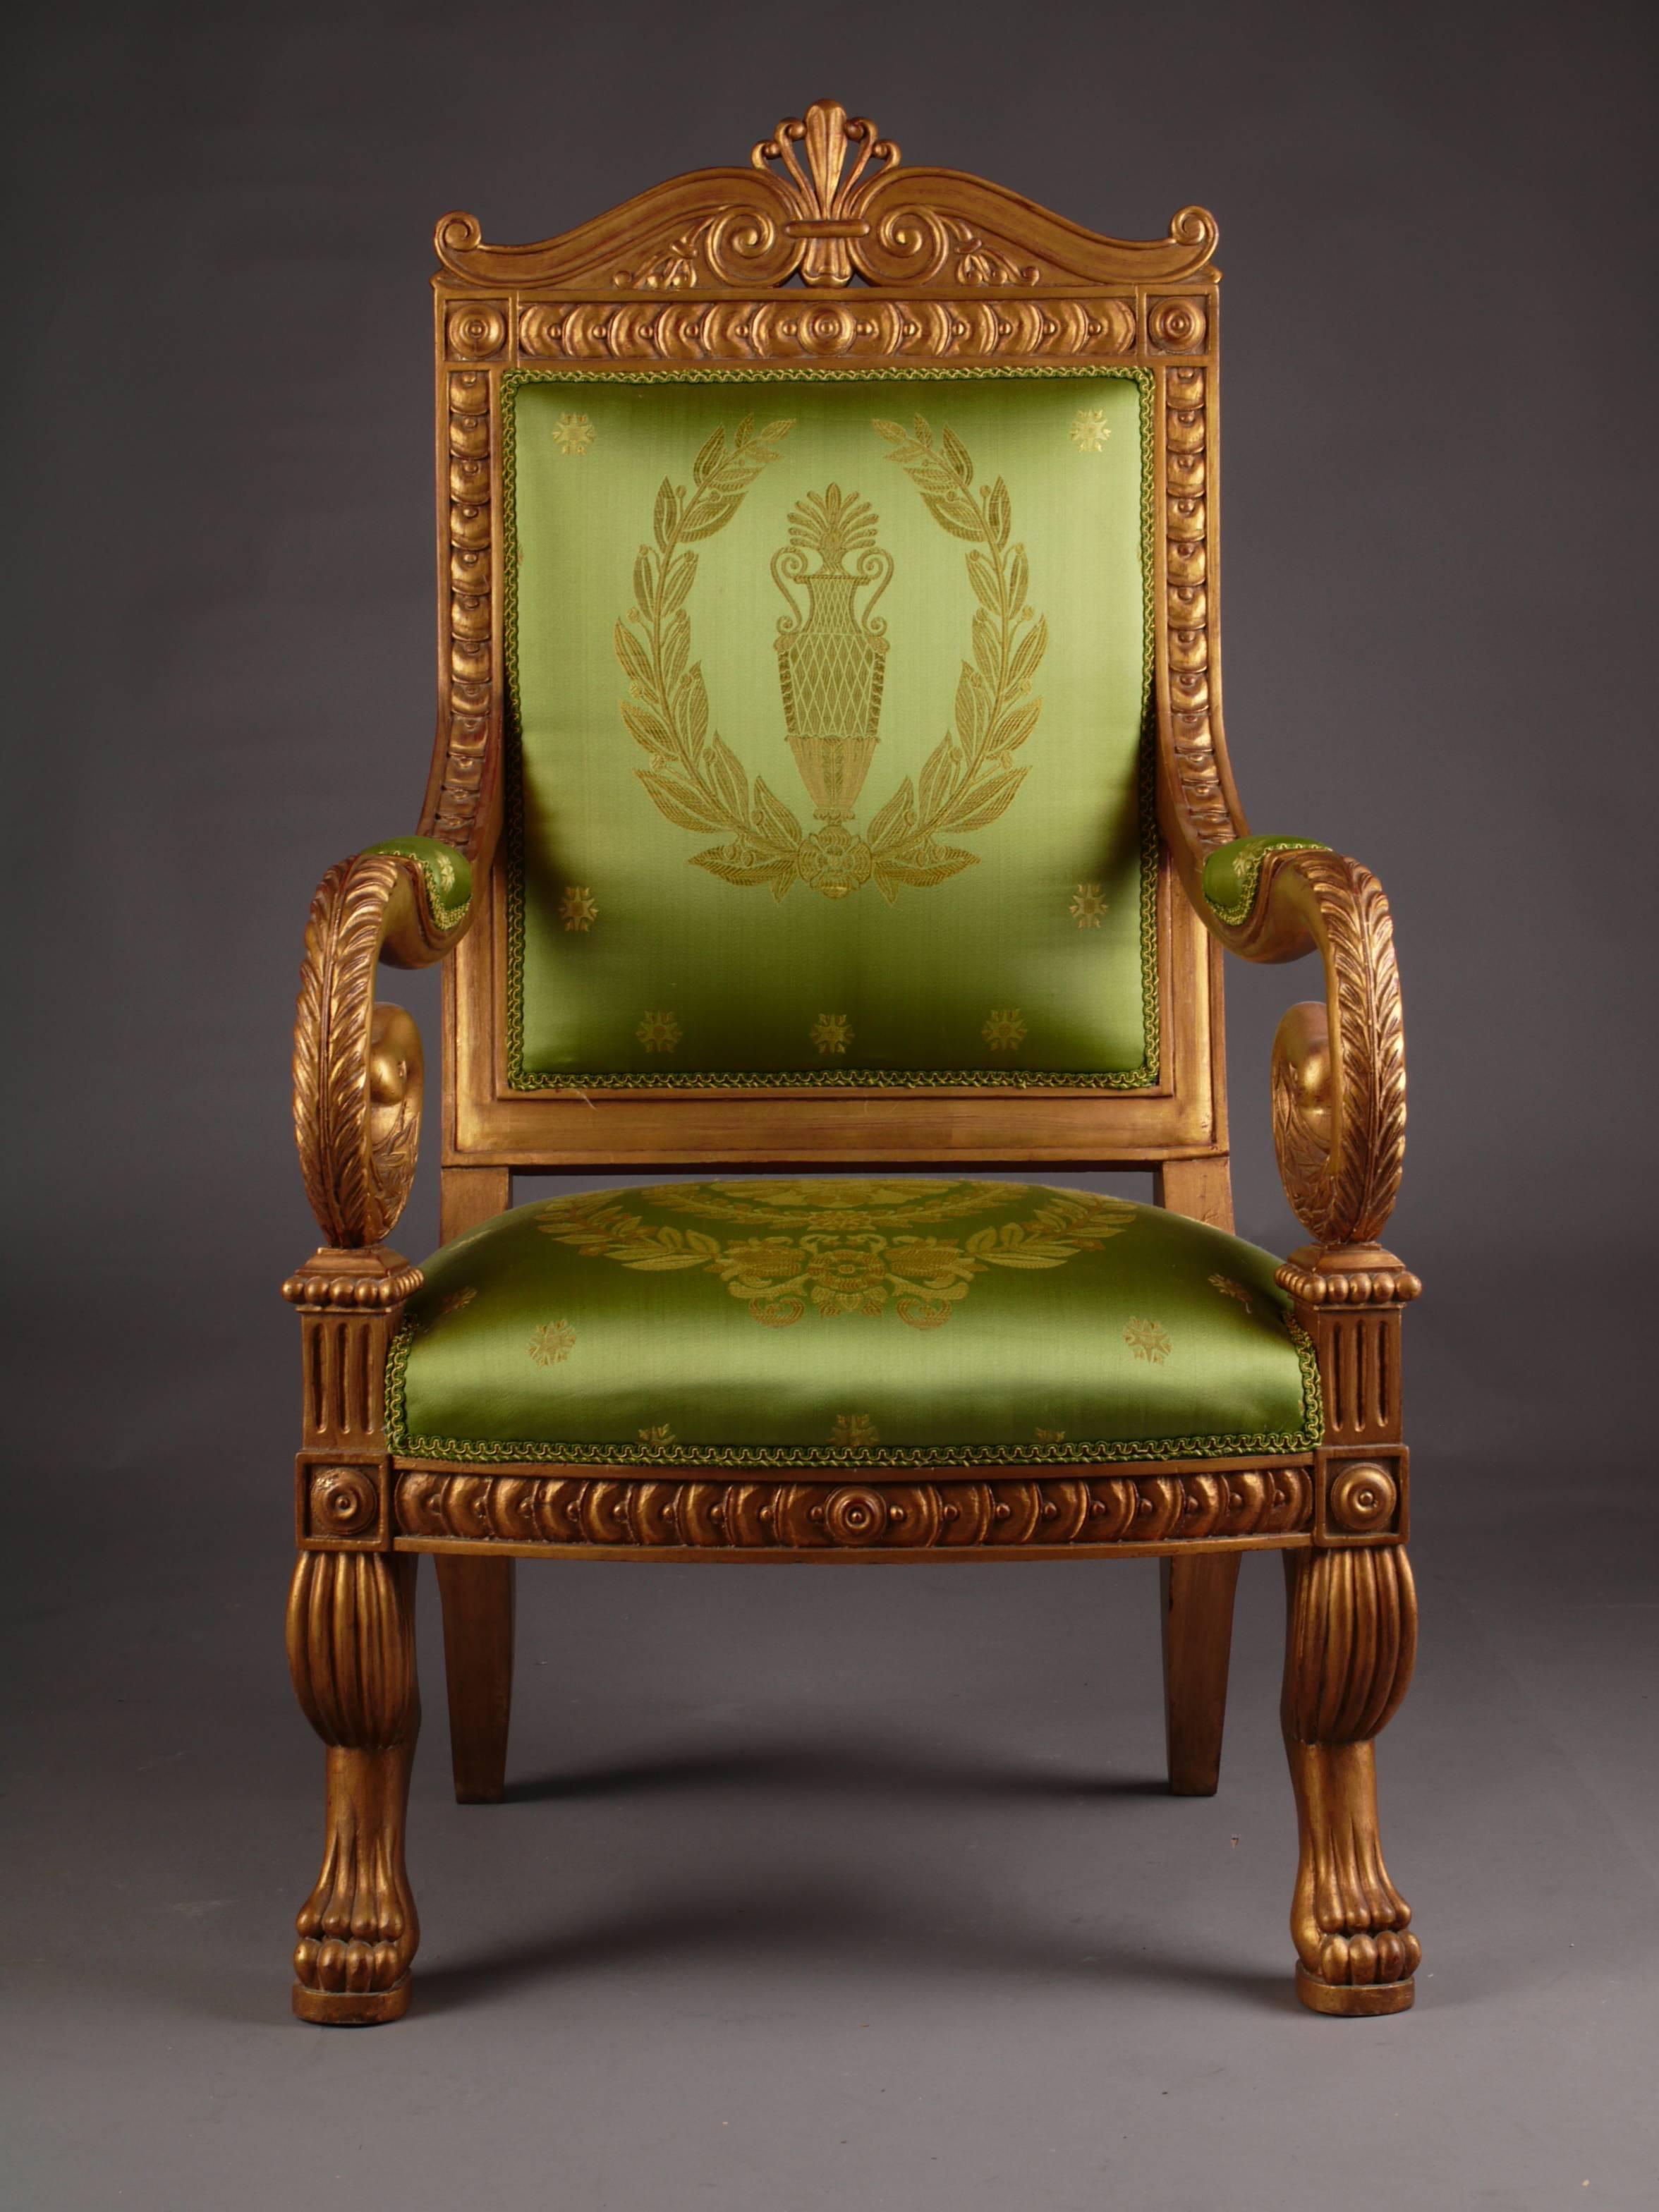 Very exact fine-carved sculpture made of solid beech. Poliment gilded. Arranged frame on plastically carved legs ending in claws. Armrests volute-shaped bent in swan head. High-backed backrest frame crowned with classical volute cornices with